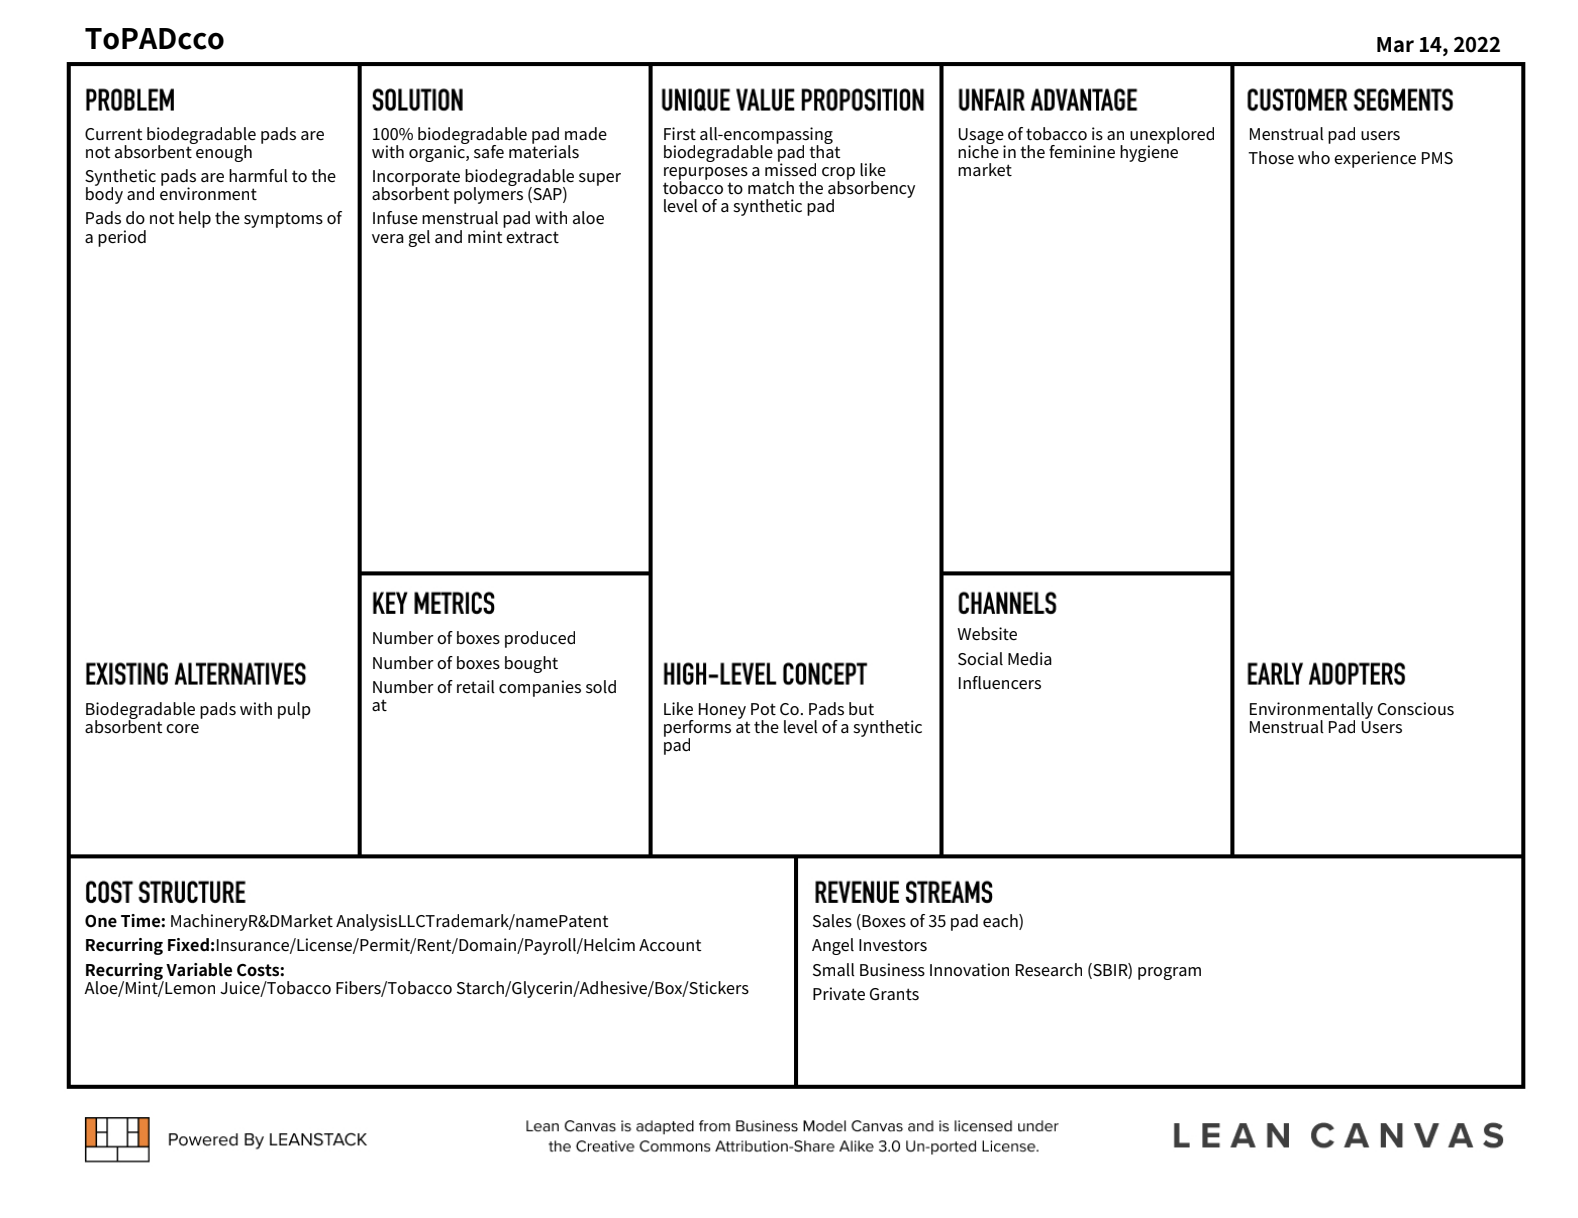 What is the Right Fill Order for a Lean Canvas?